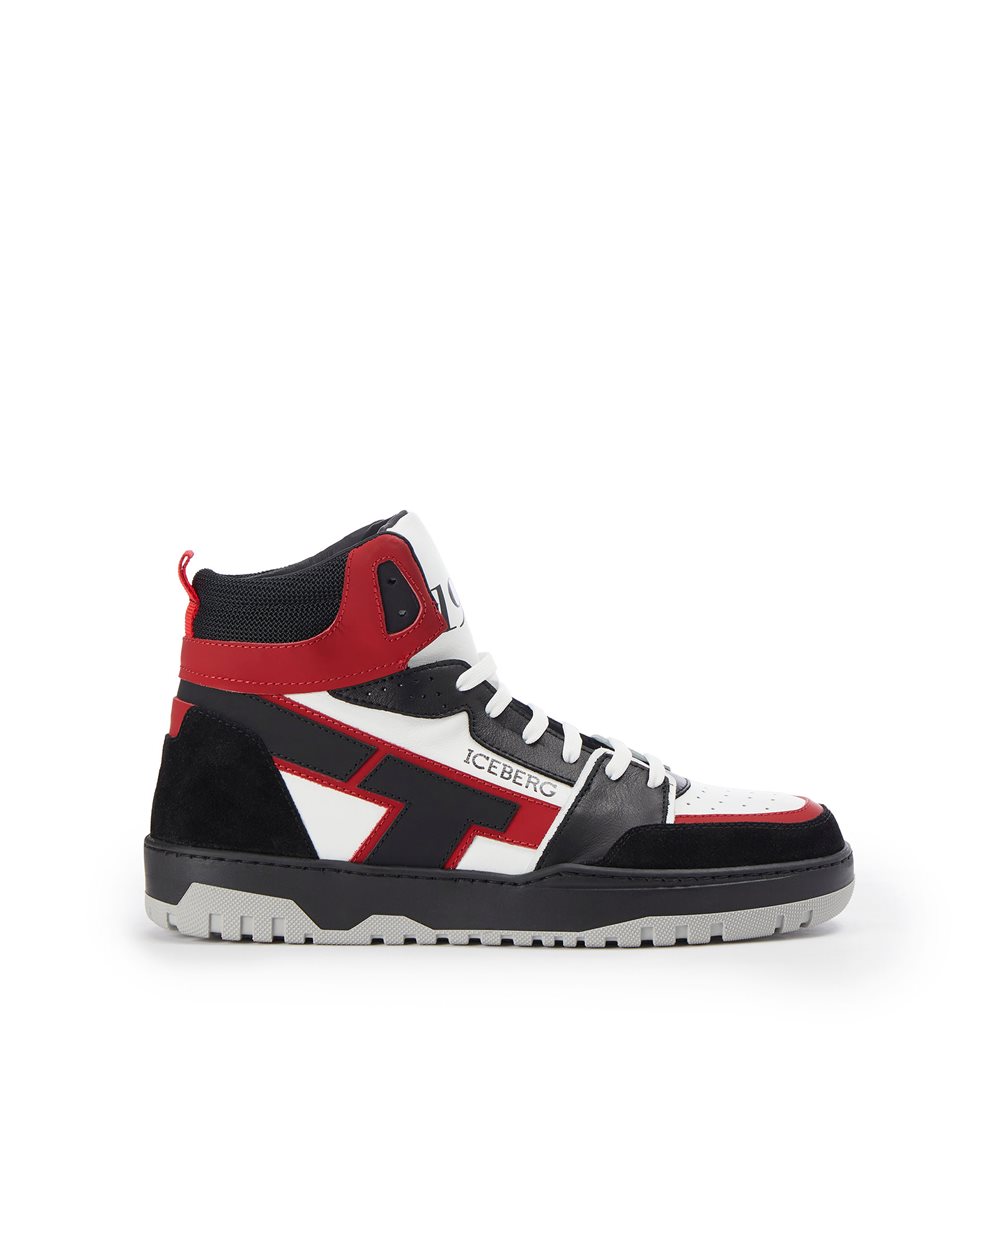 Okoro high-top sneakers - ( SECONDO STEP US  ) PROMO UP TO 30% | Iceberg - Official Website